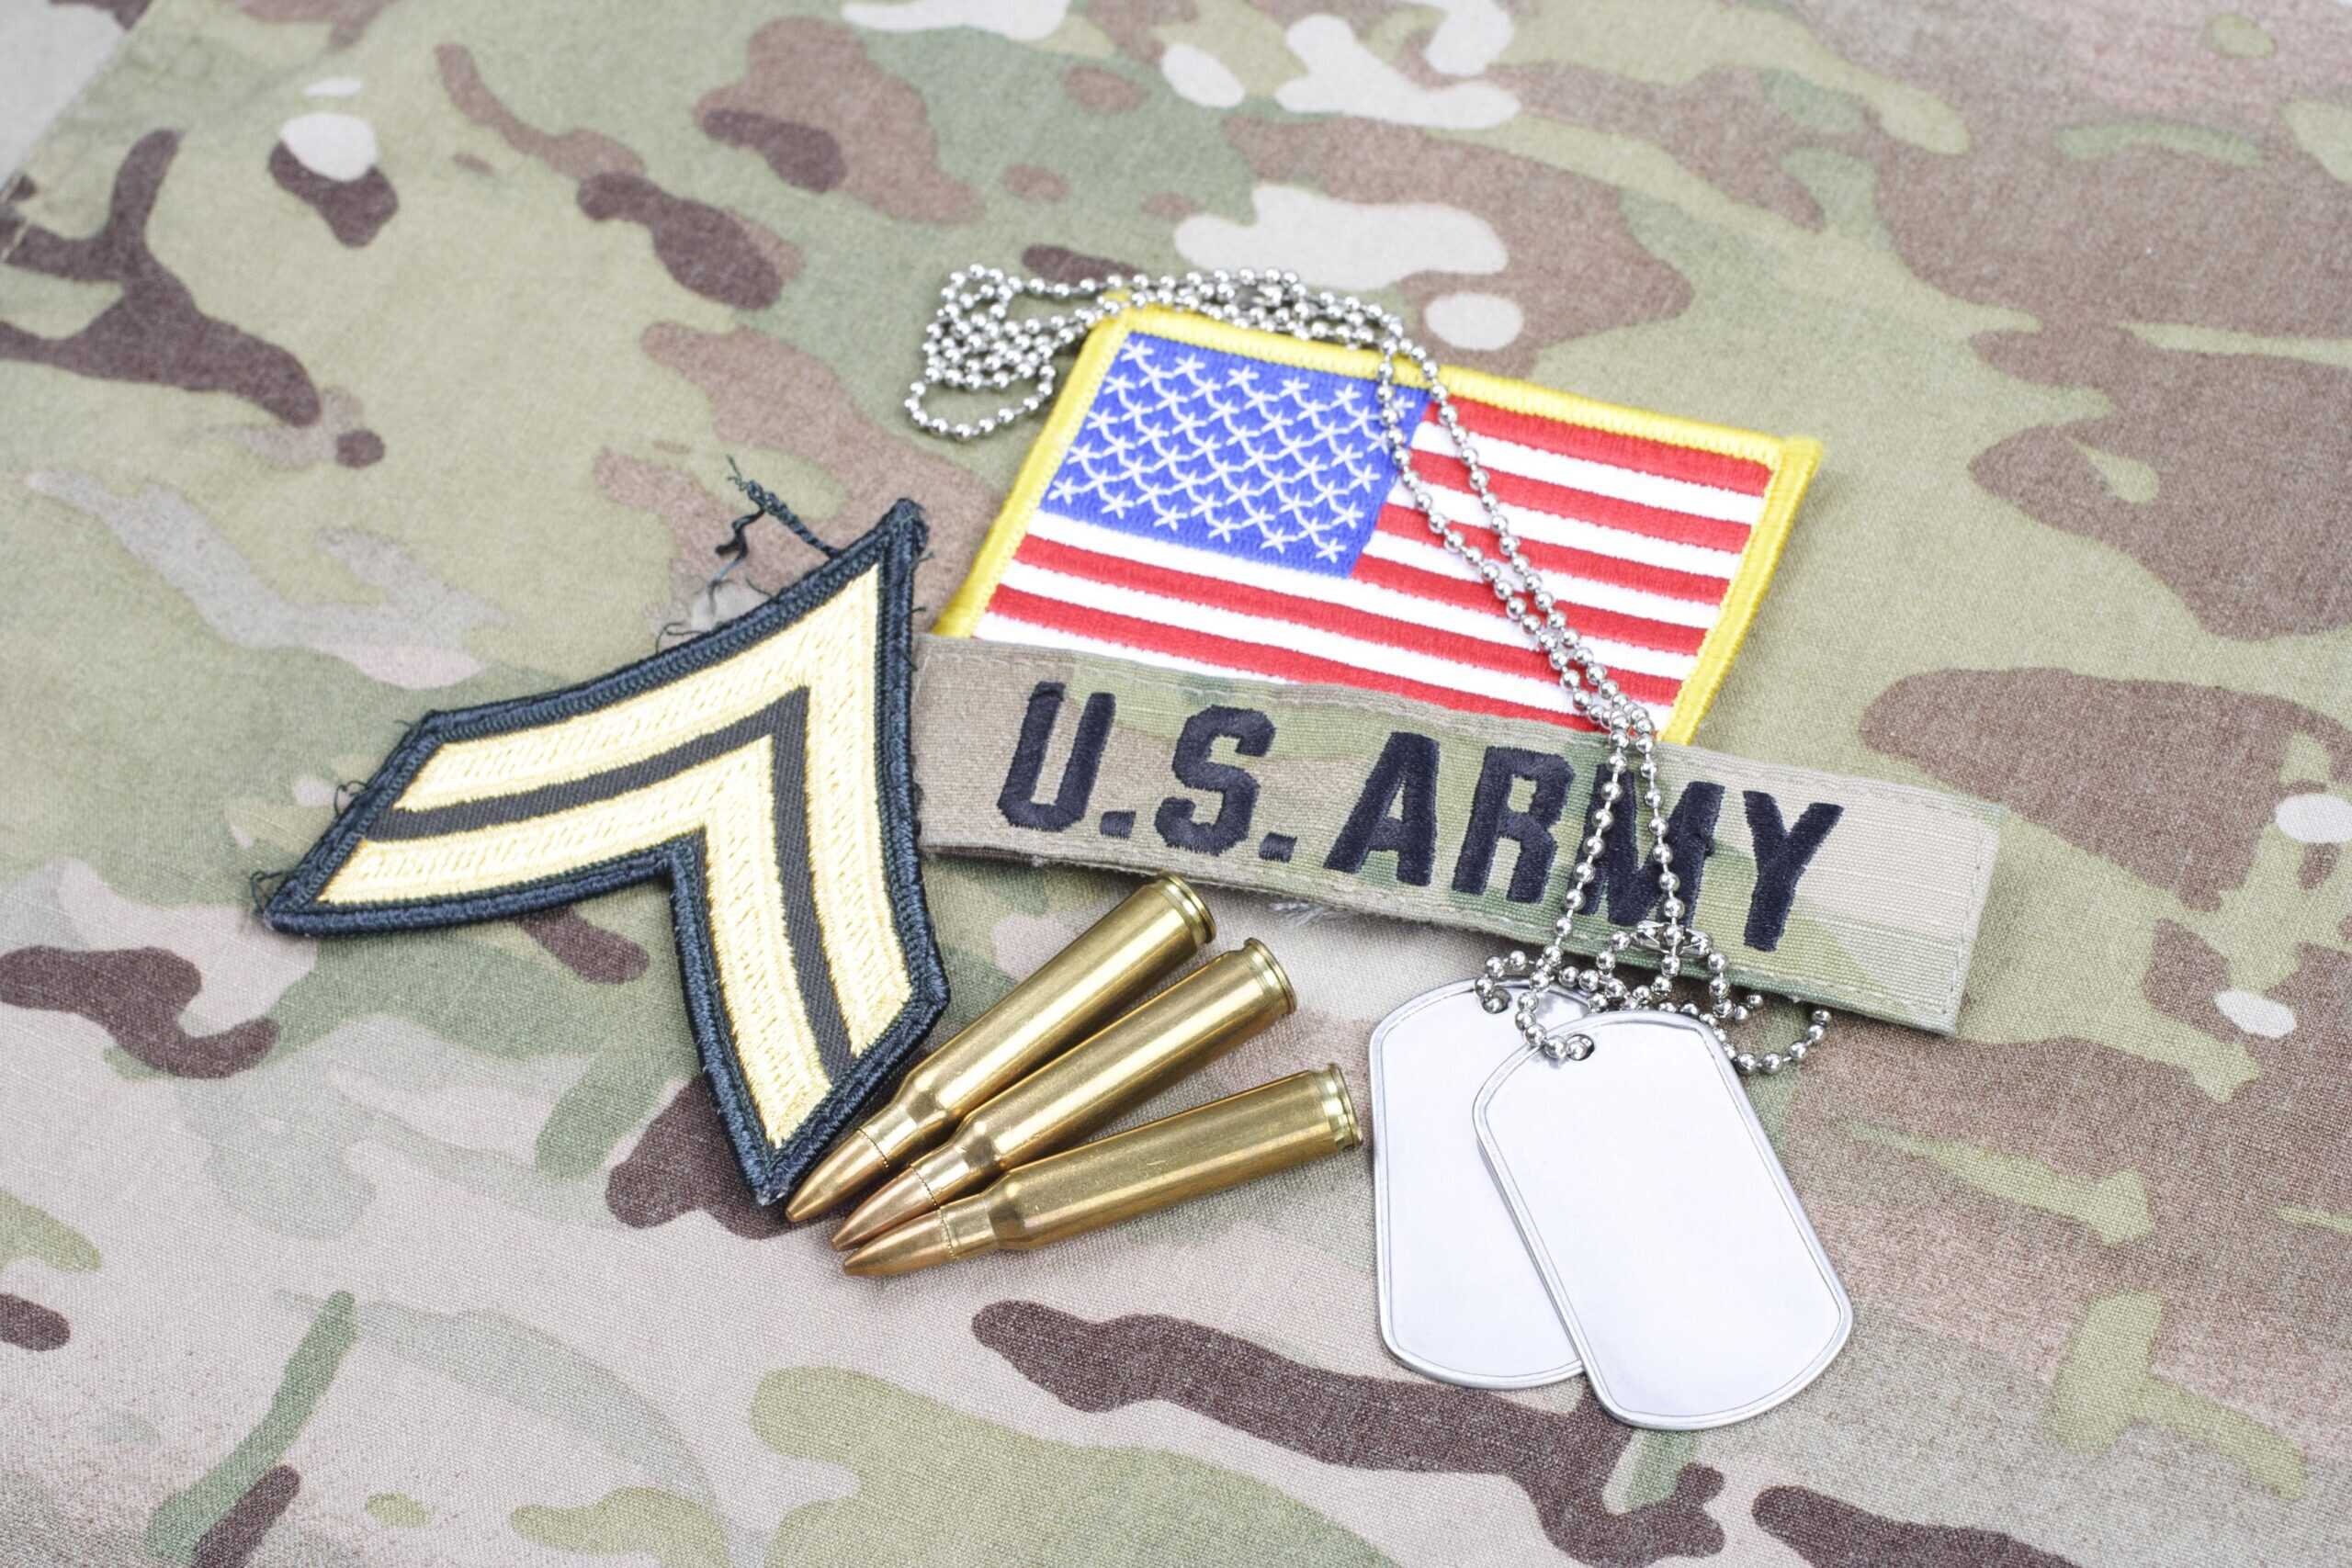 Army: Corporal | US ARMY Corporal rank patch, flag patch, with dog tag with 5.56 mm rounds on camouflage uniform